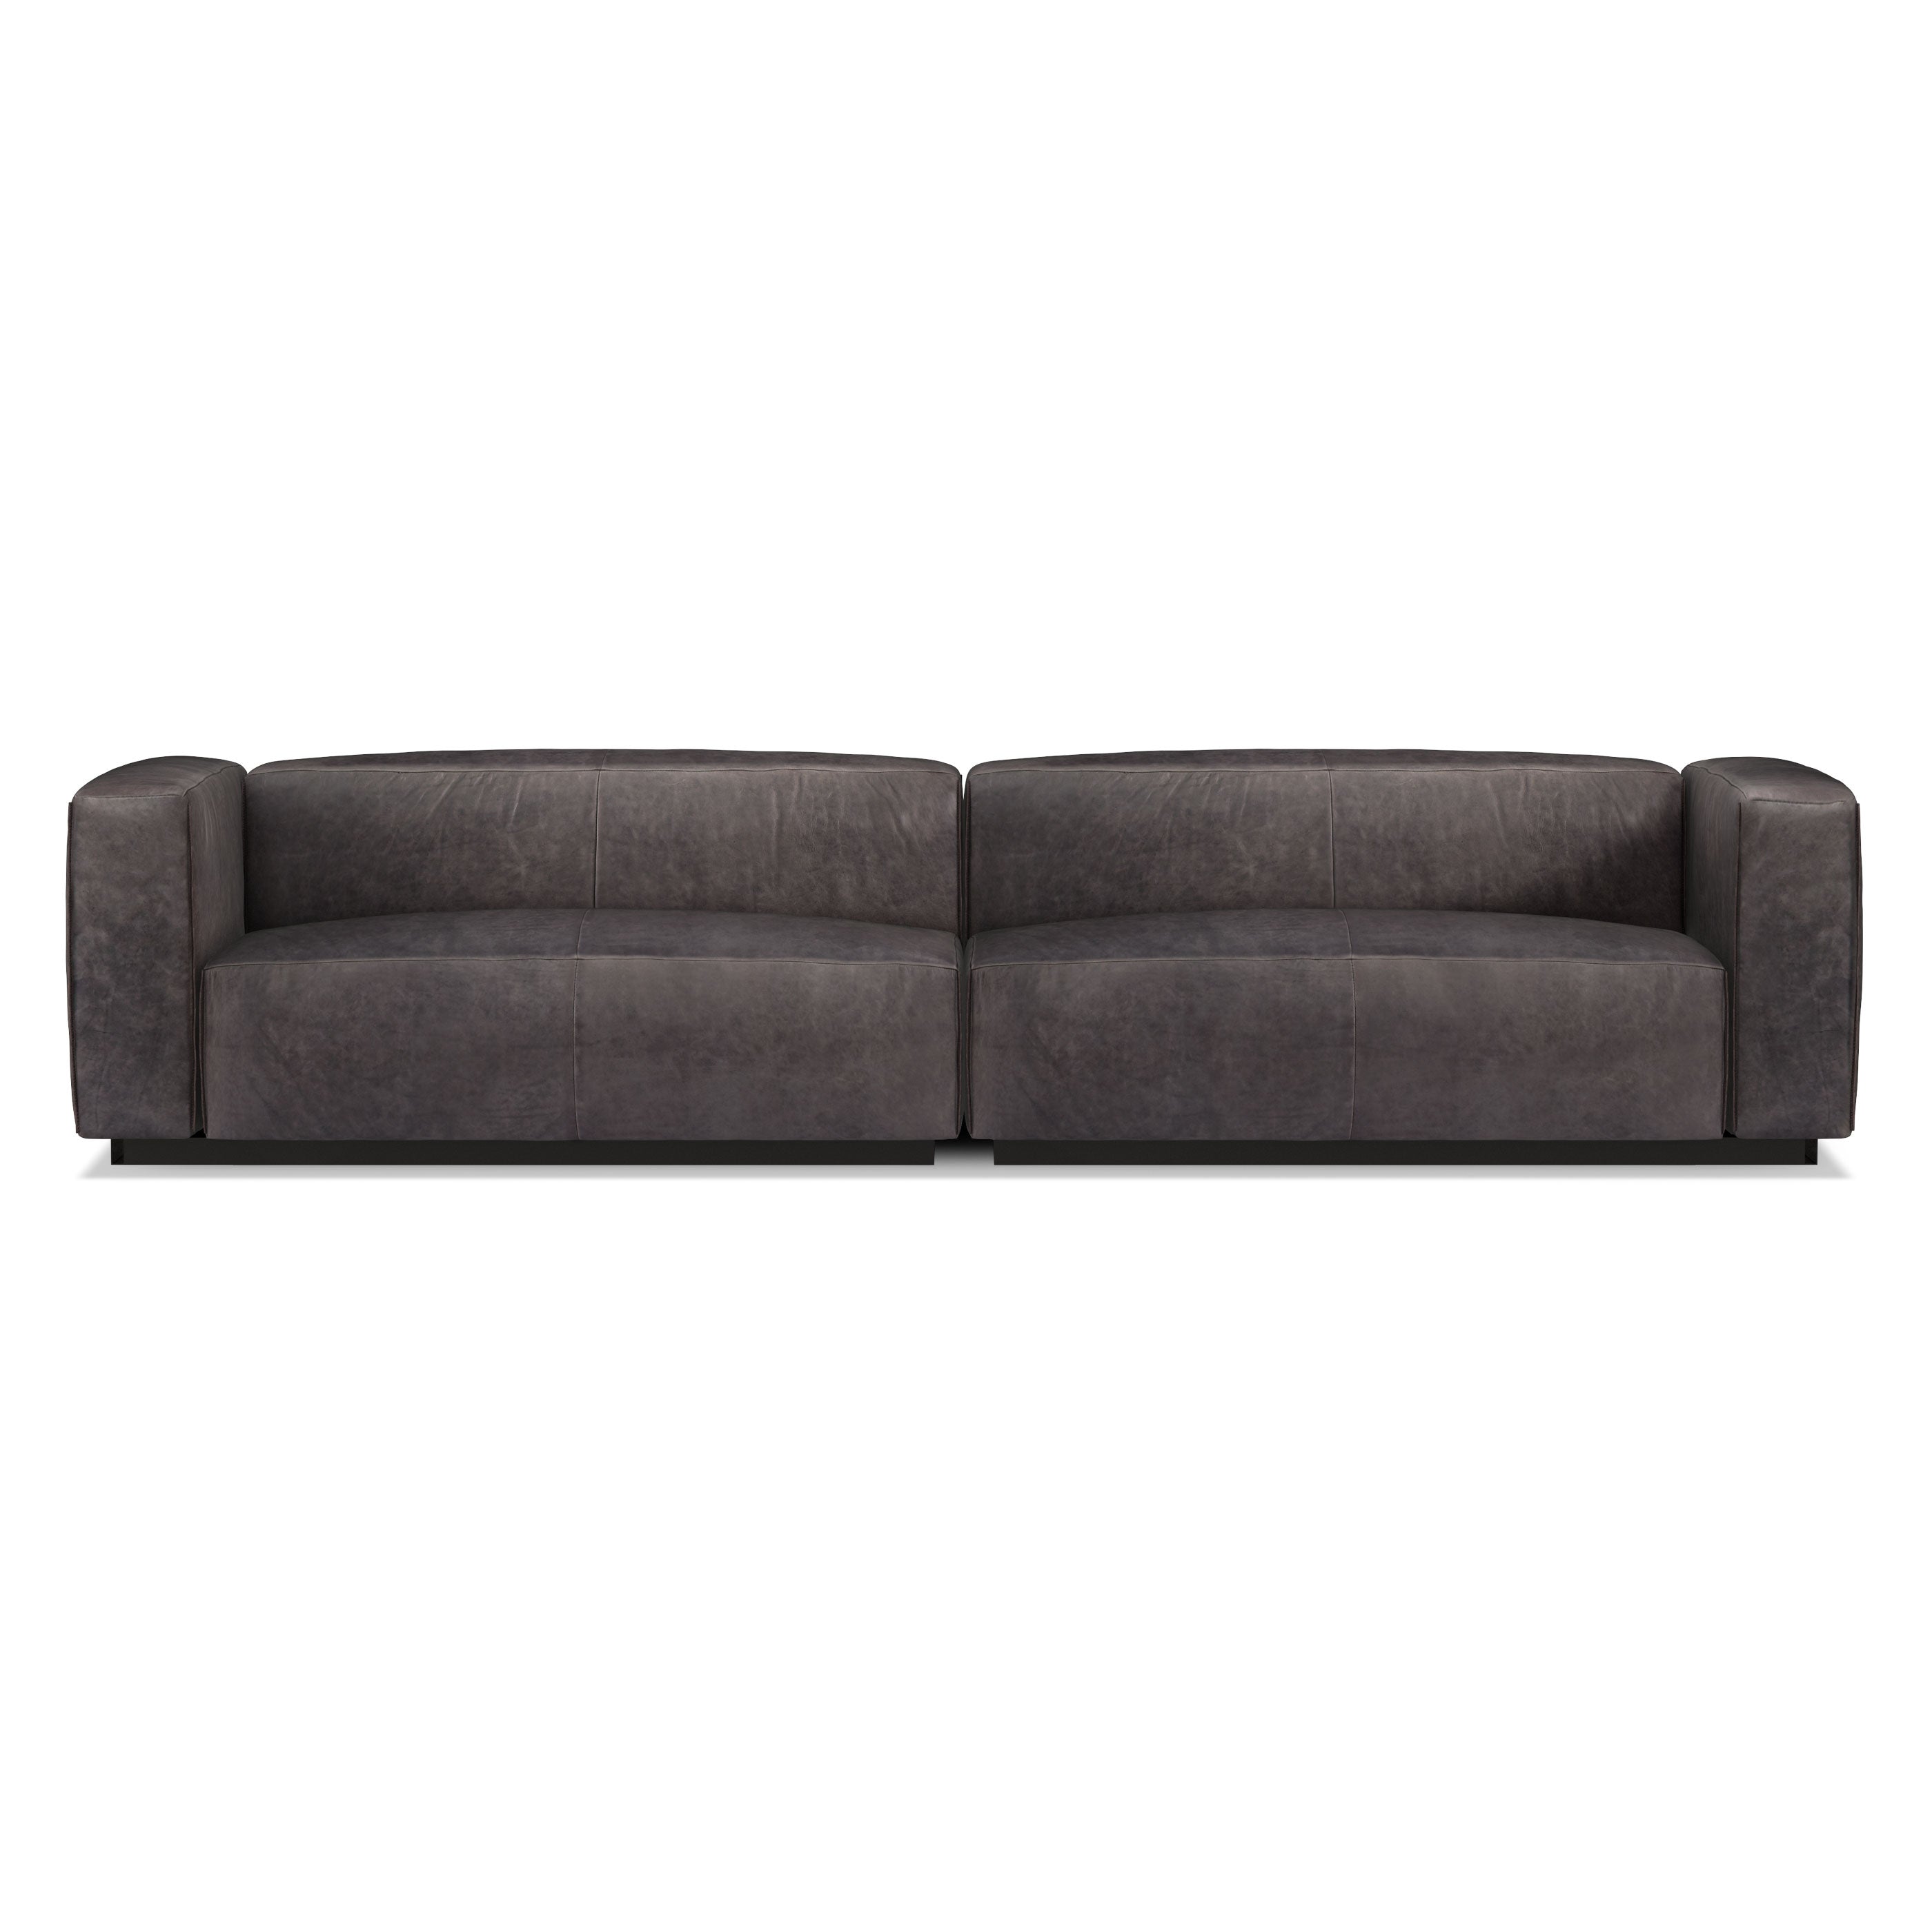 Cleon Small Leather Modular Sectional Sofa